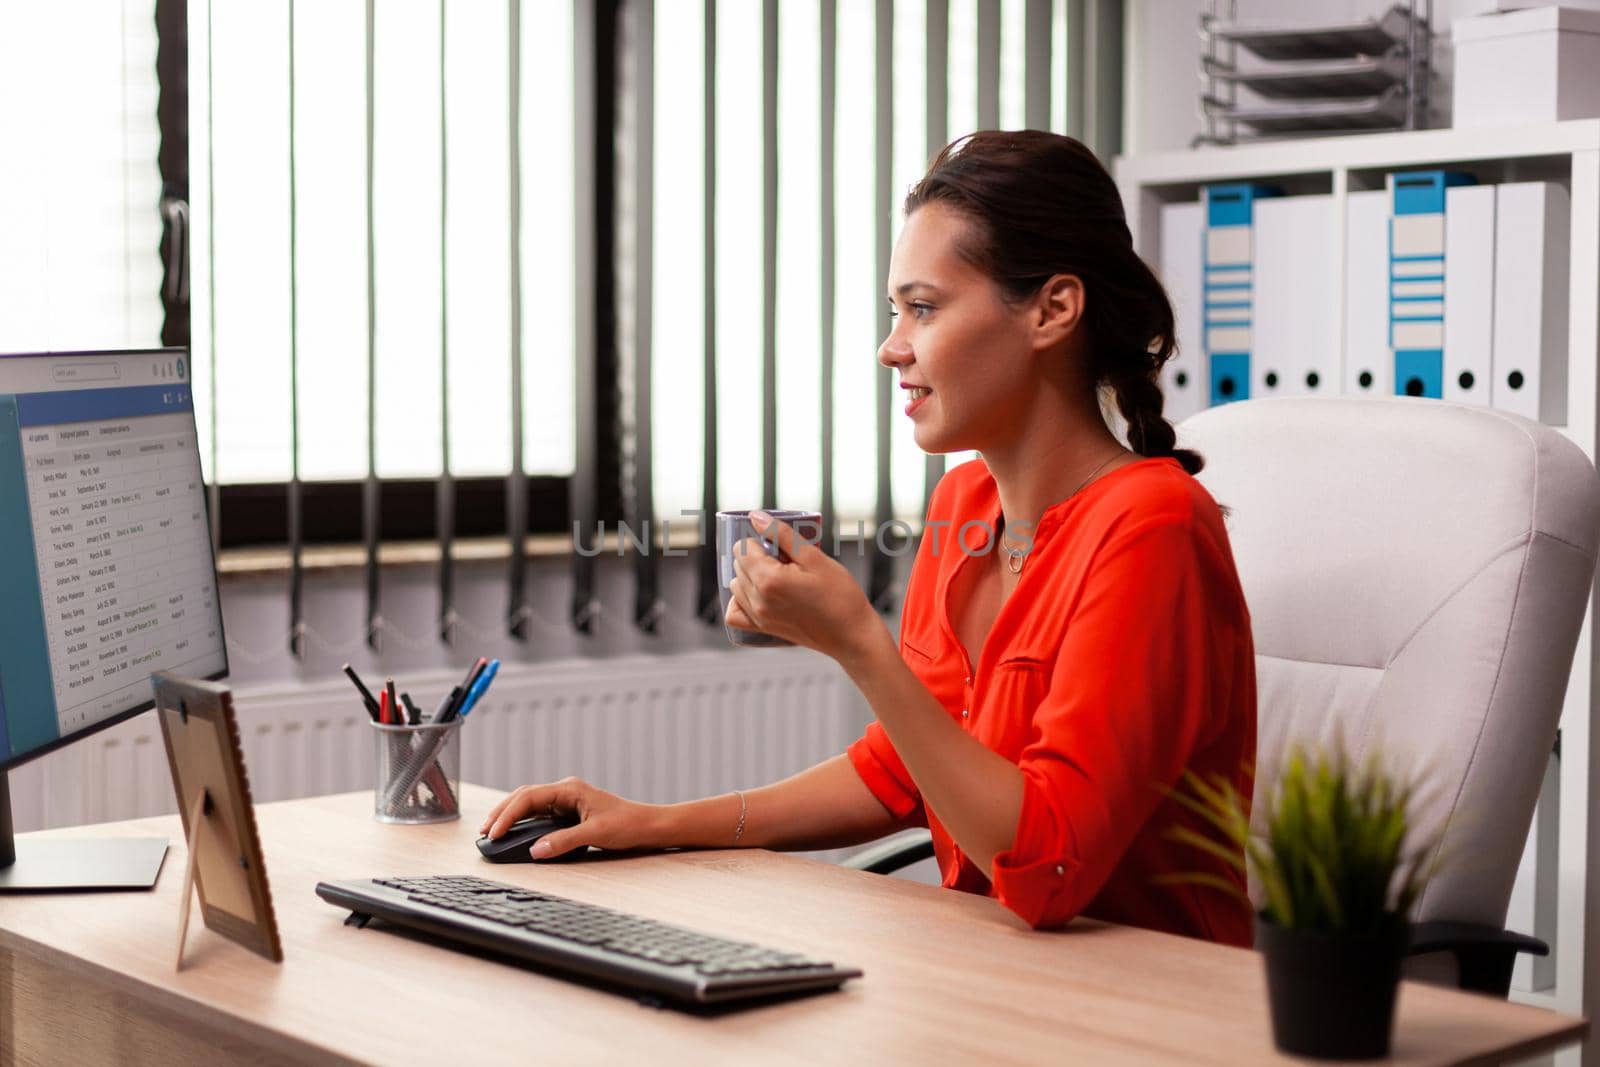 Businesswoman corporate entrepreneur concentrated looking at computer screen in office workplace. Successful confident woman in marketing sitting at desk in workplace using computer.